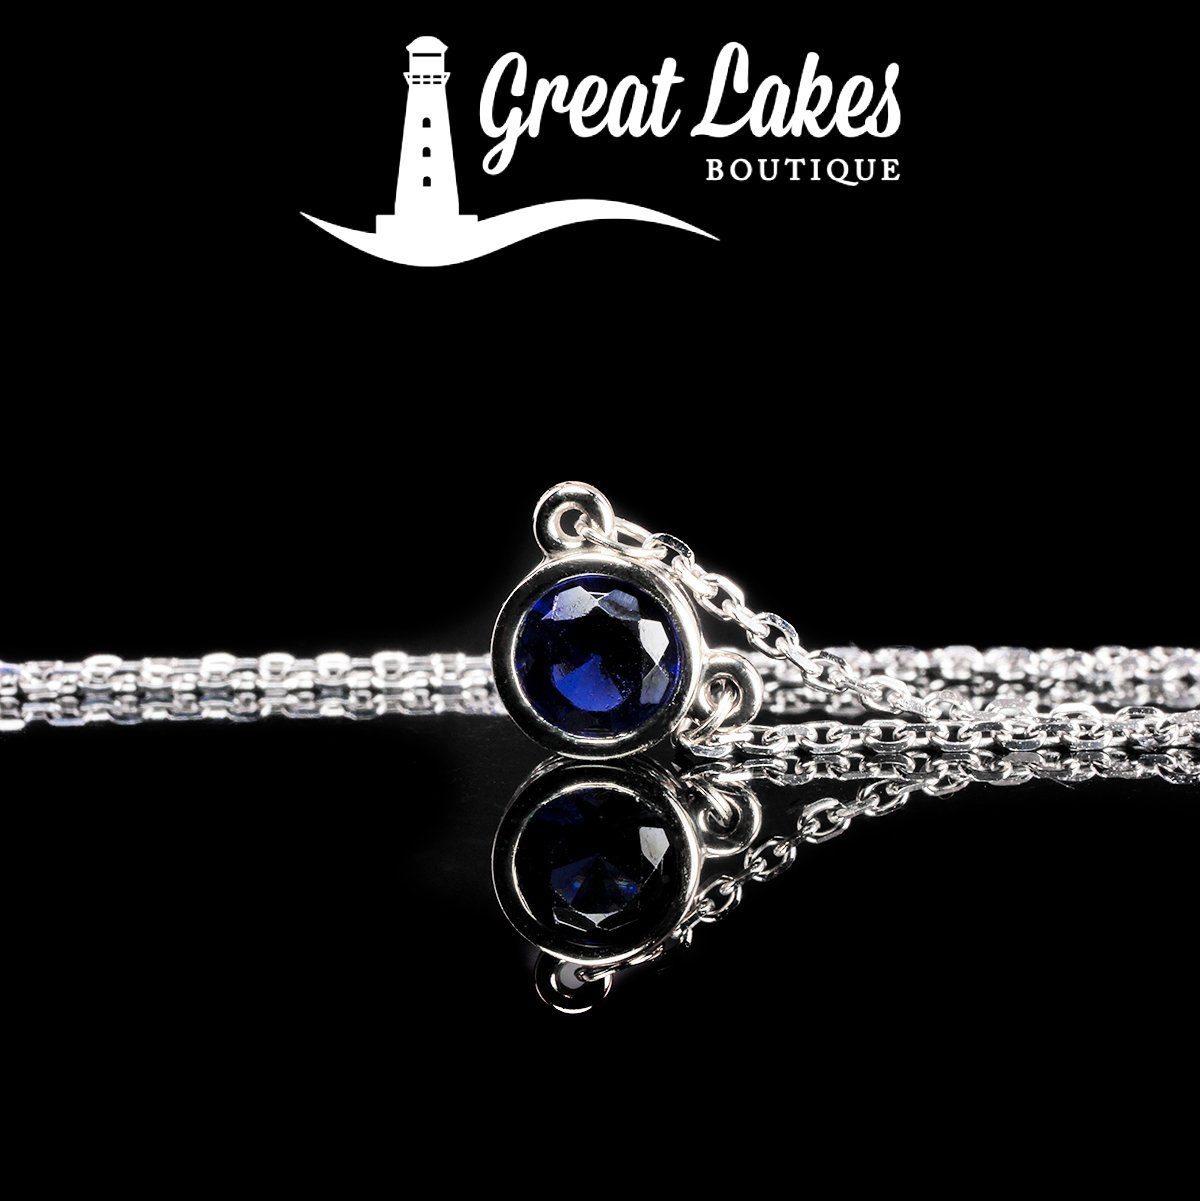 Great Lakes Boutique White Gold &amp; Sapphire Necklace